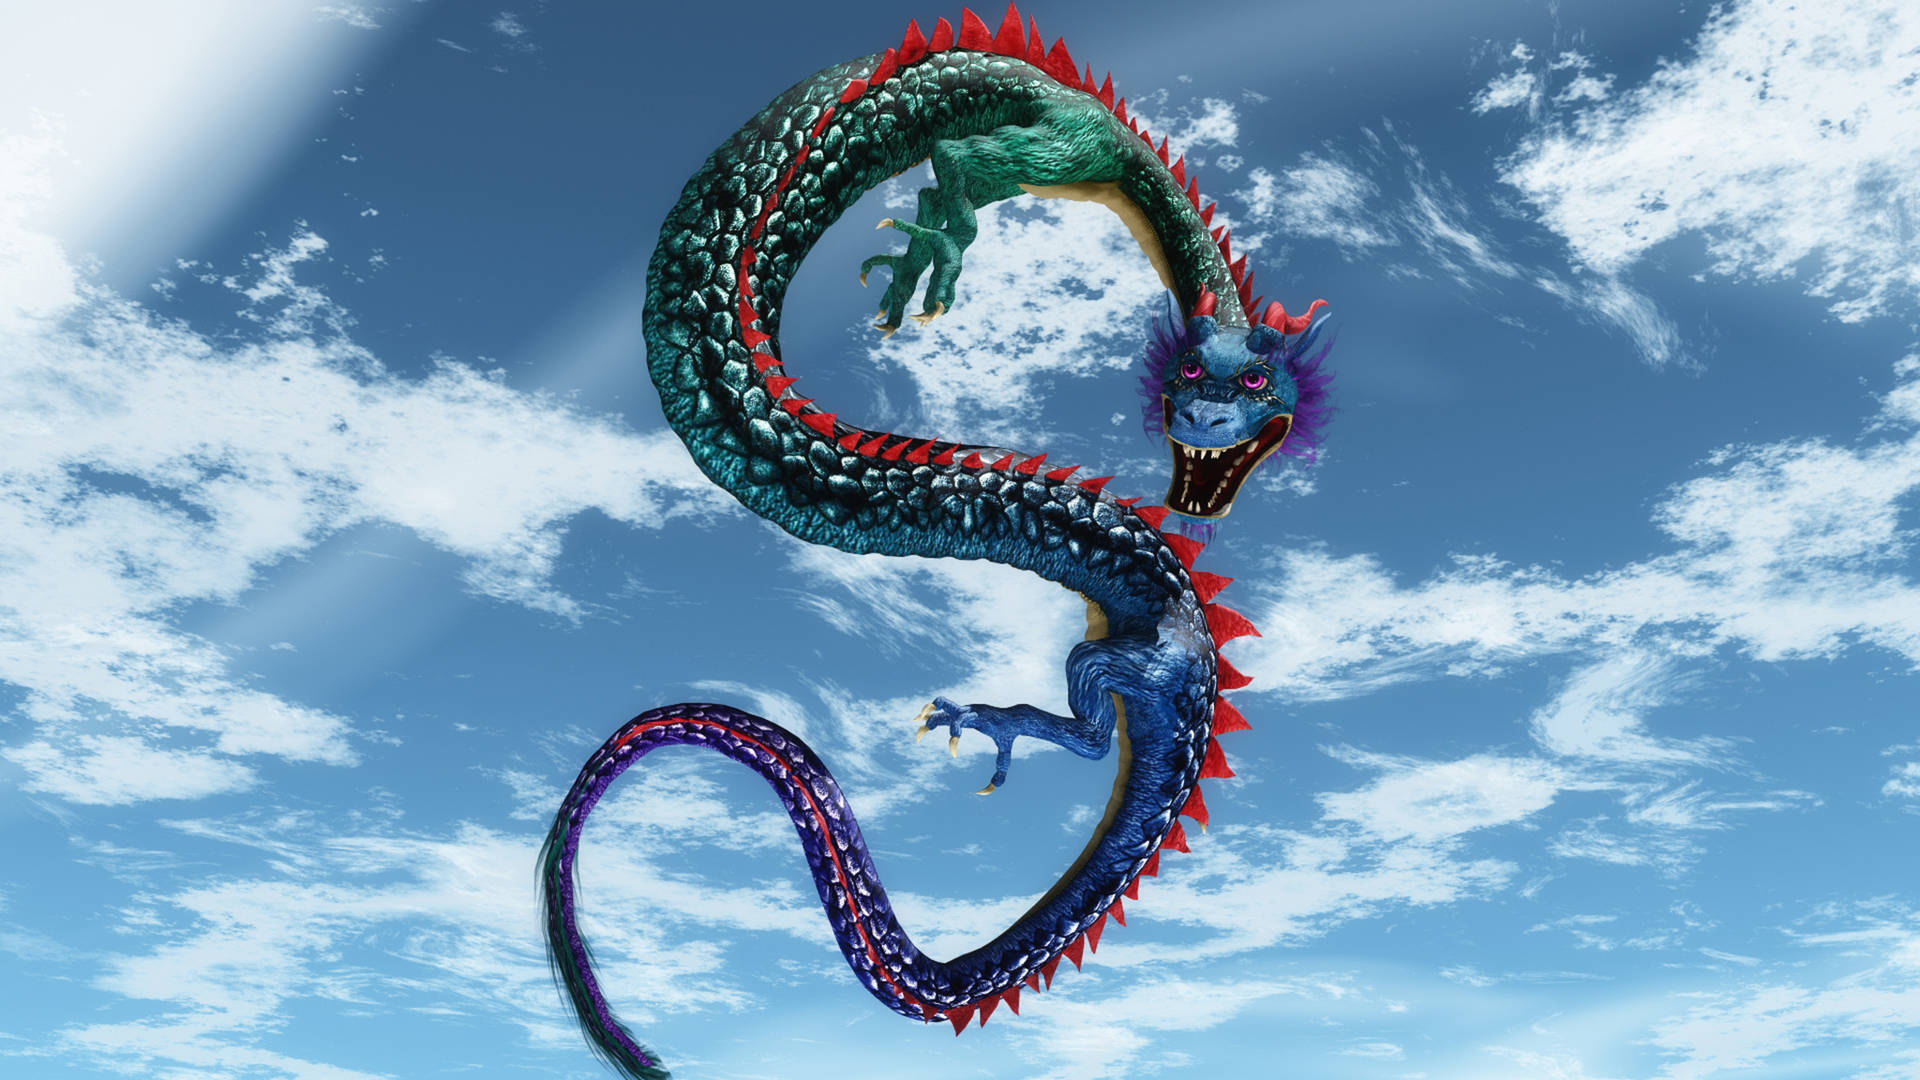 Colorful Eastern Dragon Background